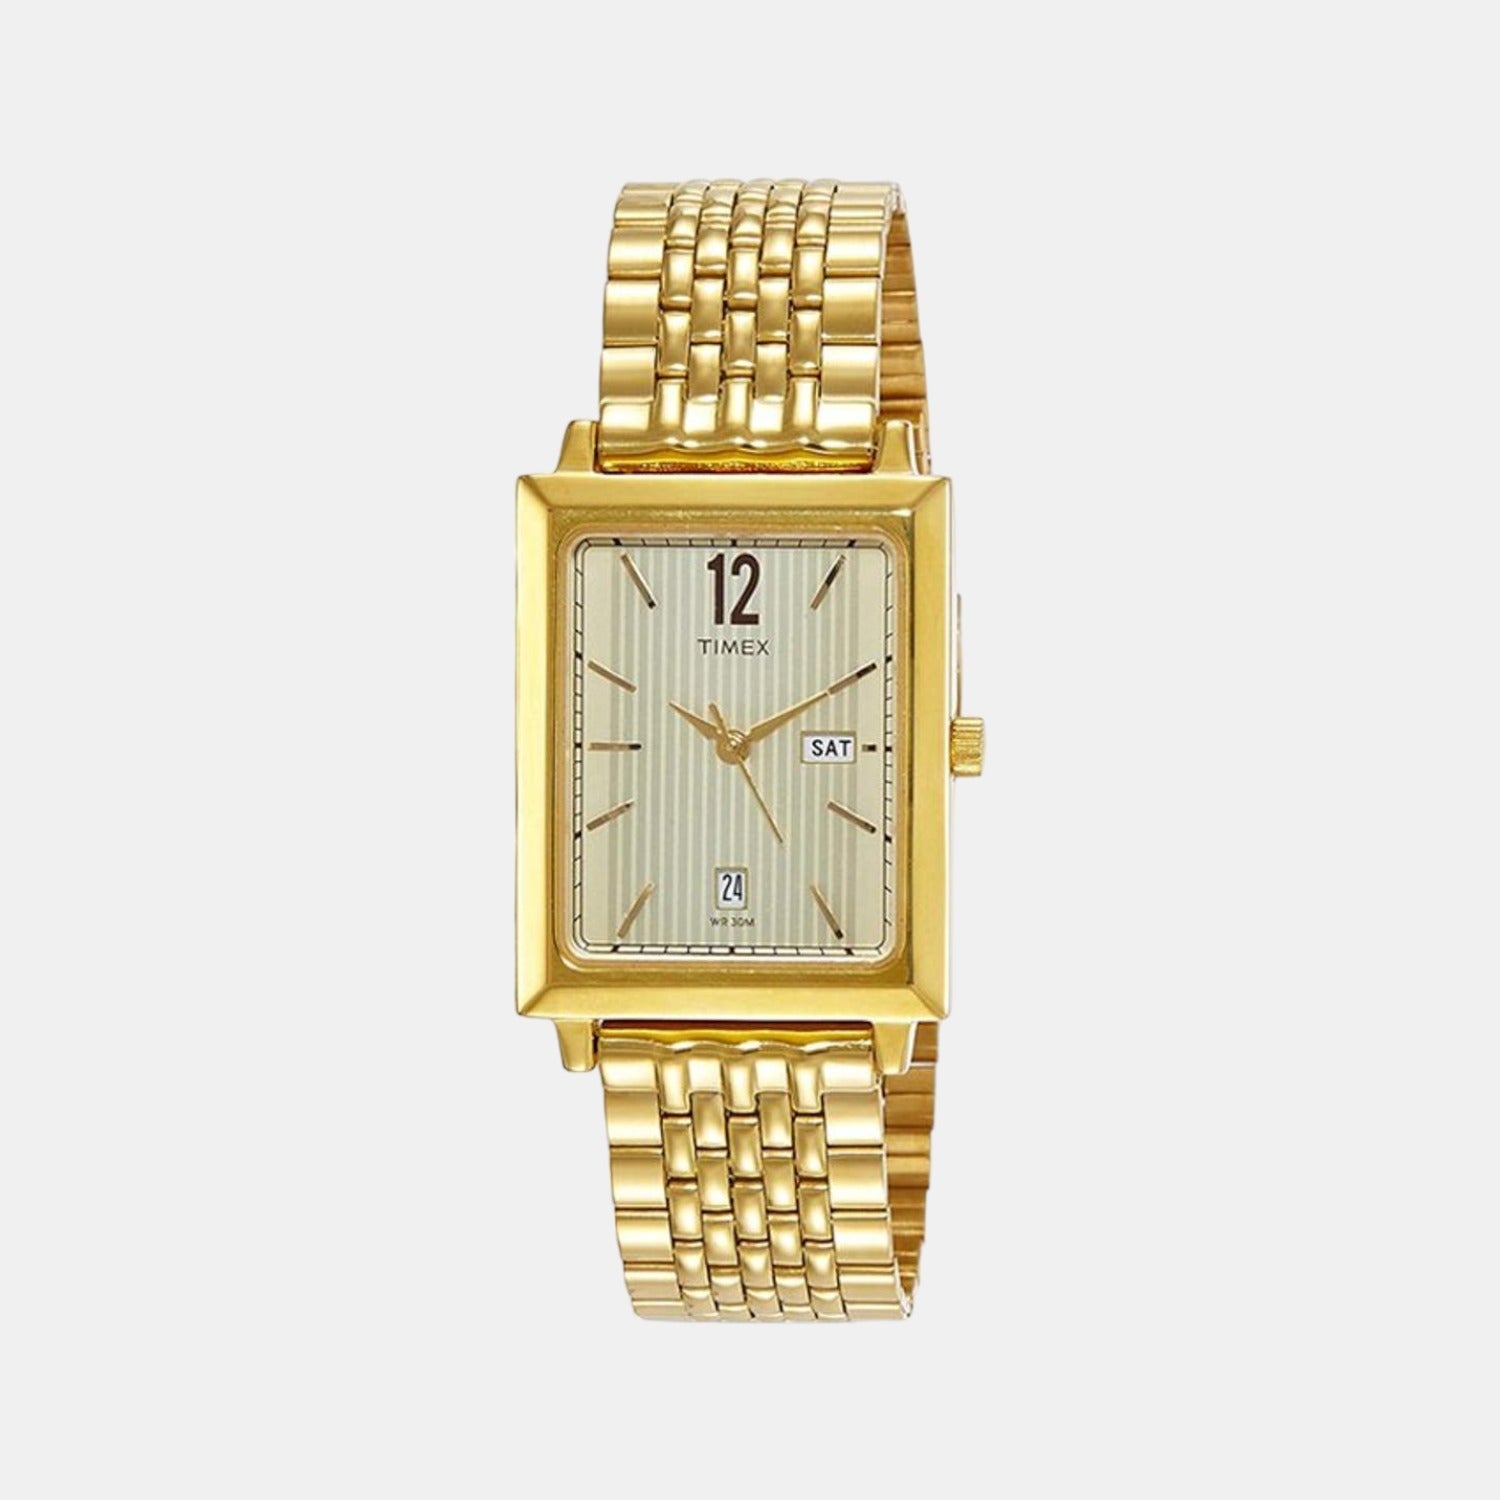 The Top 10 Luxury Watches For Men And Women in Steel And Gold